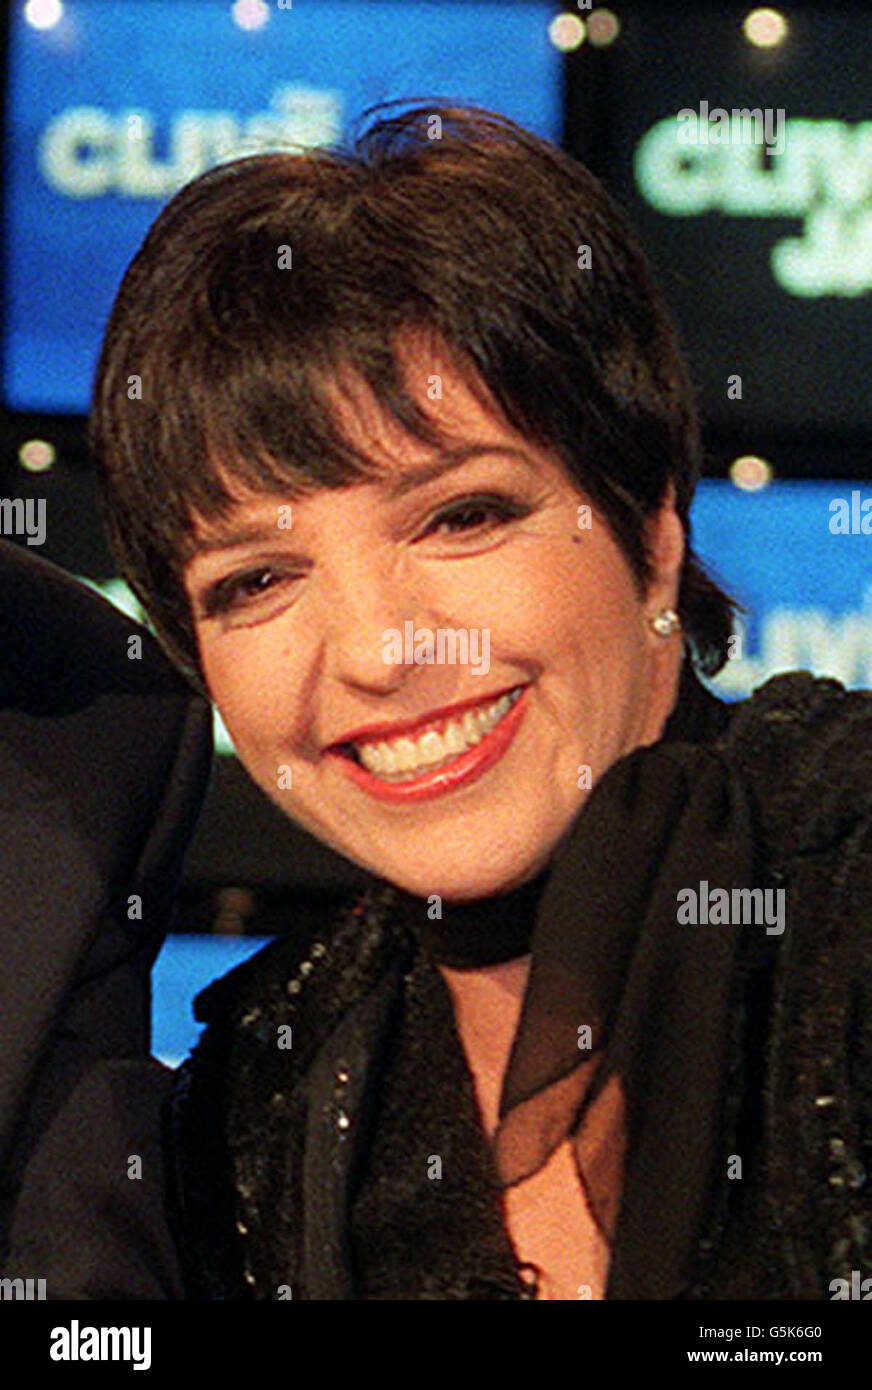 Actress/singer Liza Minnelli. 23/11/01: Minnelli who revealed she has put health fears behind her and was planning her fourth marriage. The 55-year-old singer said she was so happy as she revealed the 3.5 carat diamond ring given to her by fiance David Gest. * who produced Michael Jackson's comeback concert in September 2001. 10/12/01: Actress and singer Liza Minnelli is to be married in a lavish New York ceremony with Dame Elizabeth Taylor as her maid of honour and Michael Jackson giving her away. The star will tie the knot with her fourth husband, David Gest, in New York's St Patrick's Stock Photo